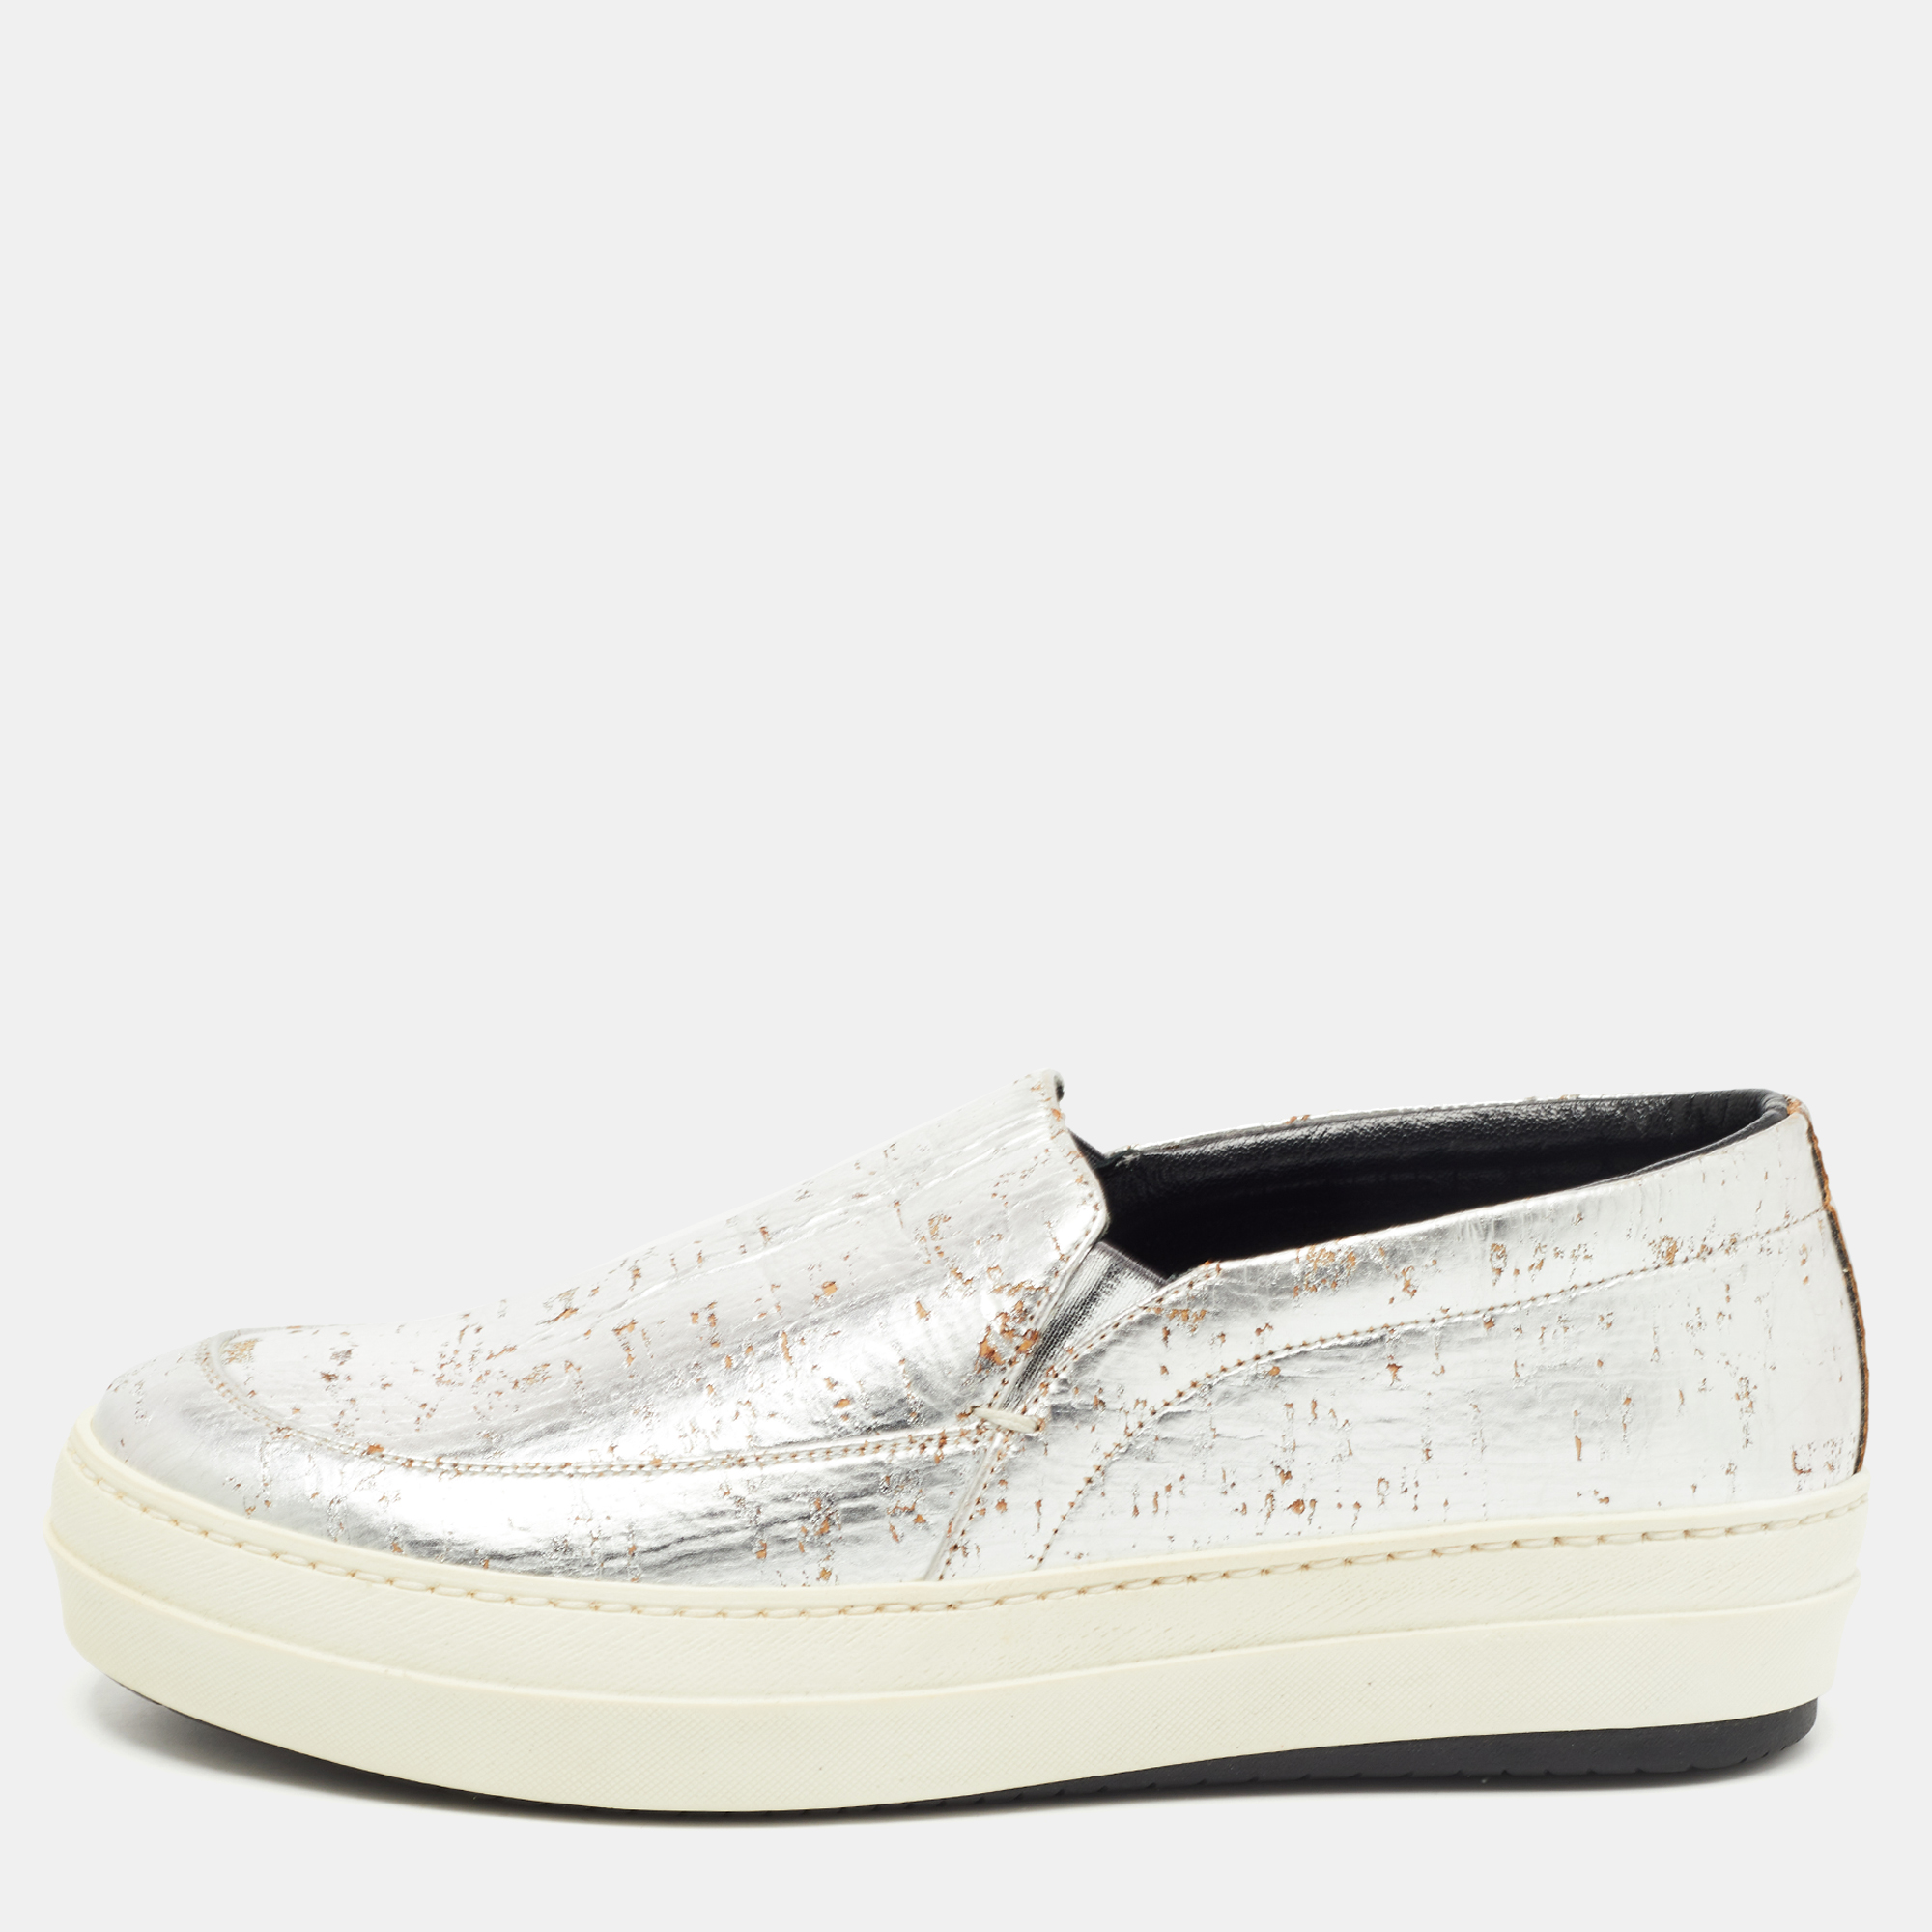 Pre-owned Mcq By Alexander Mcqueen Foil Silver Cork Slip On Sneakers Size 38